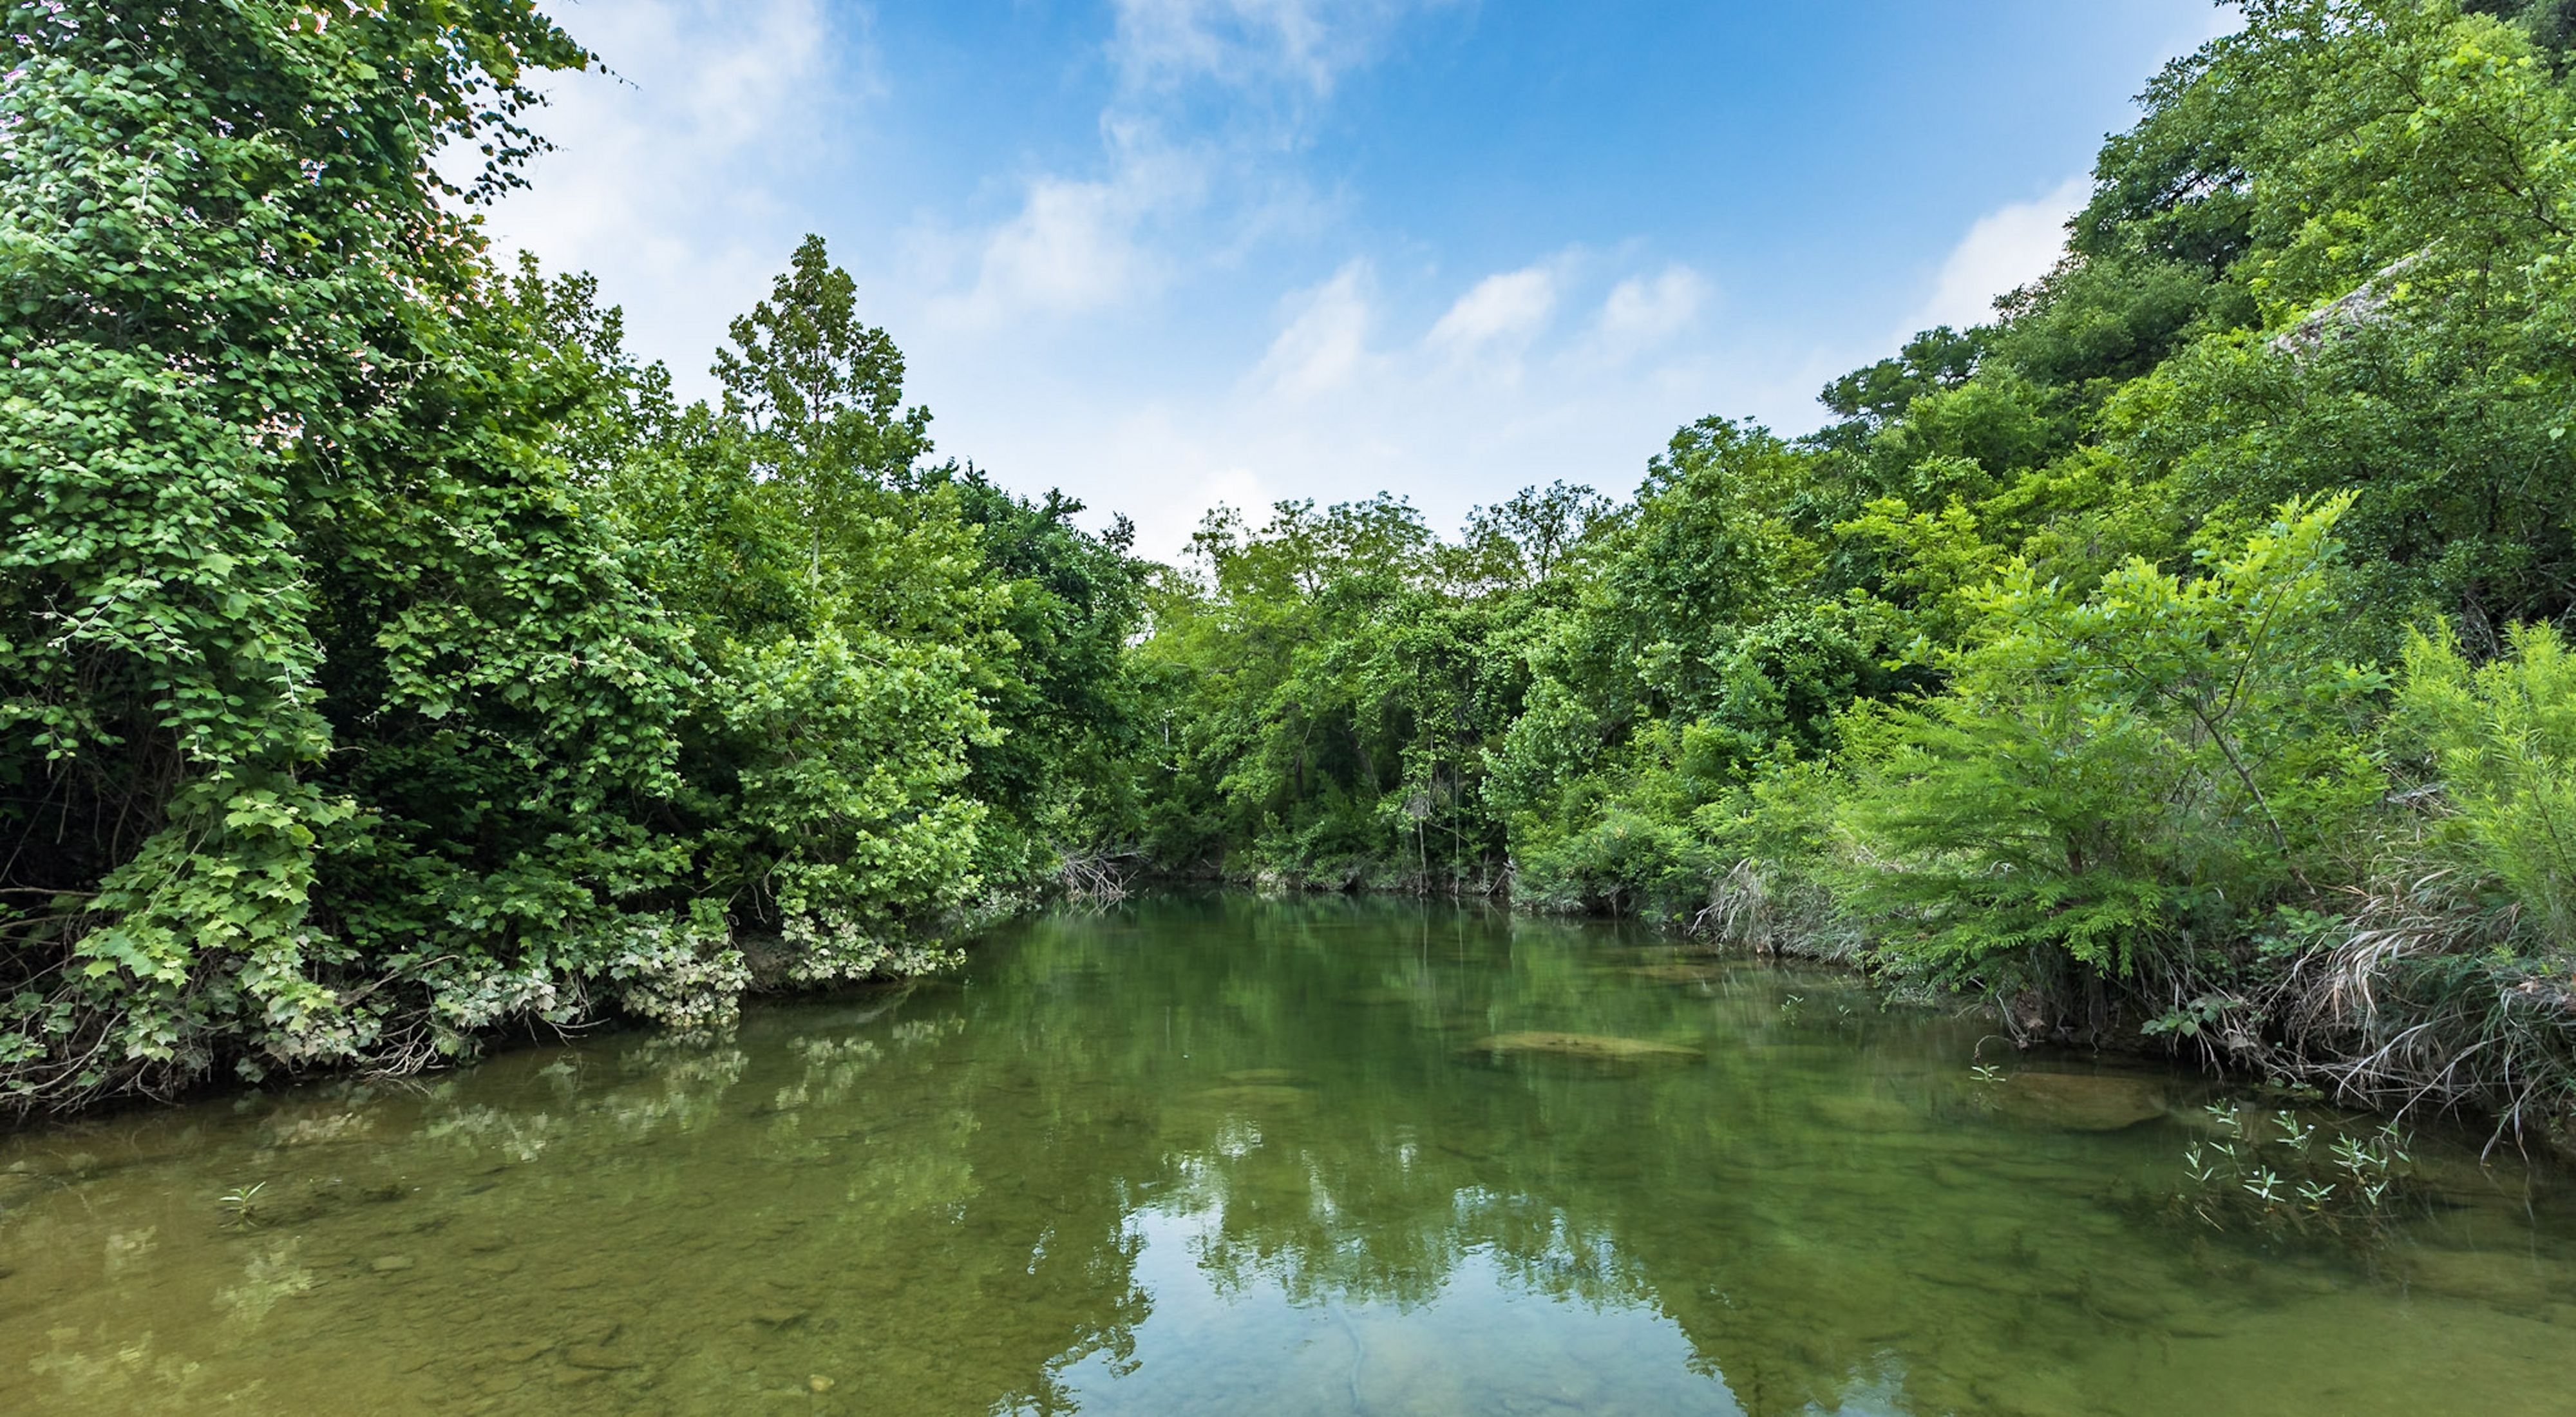 A clear creek lined by dense, green trees.